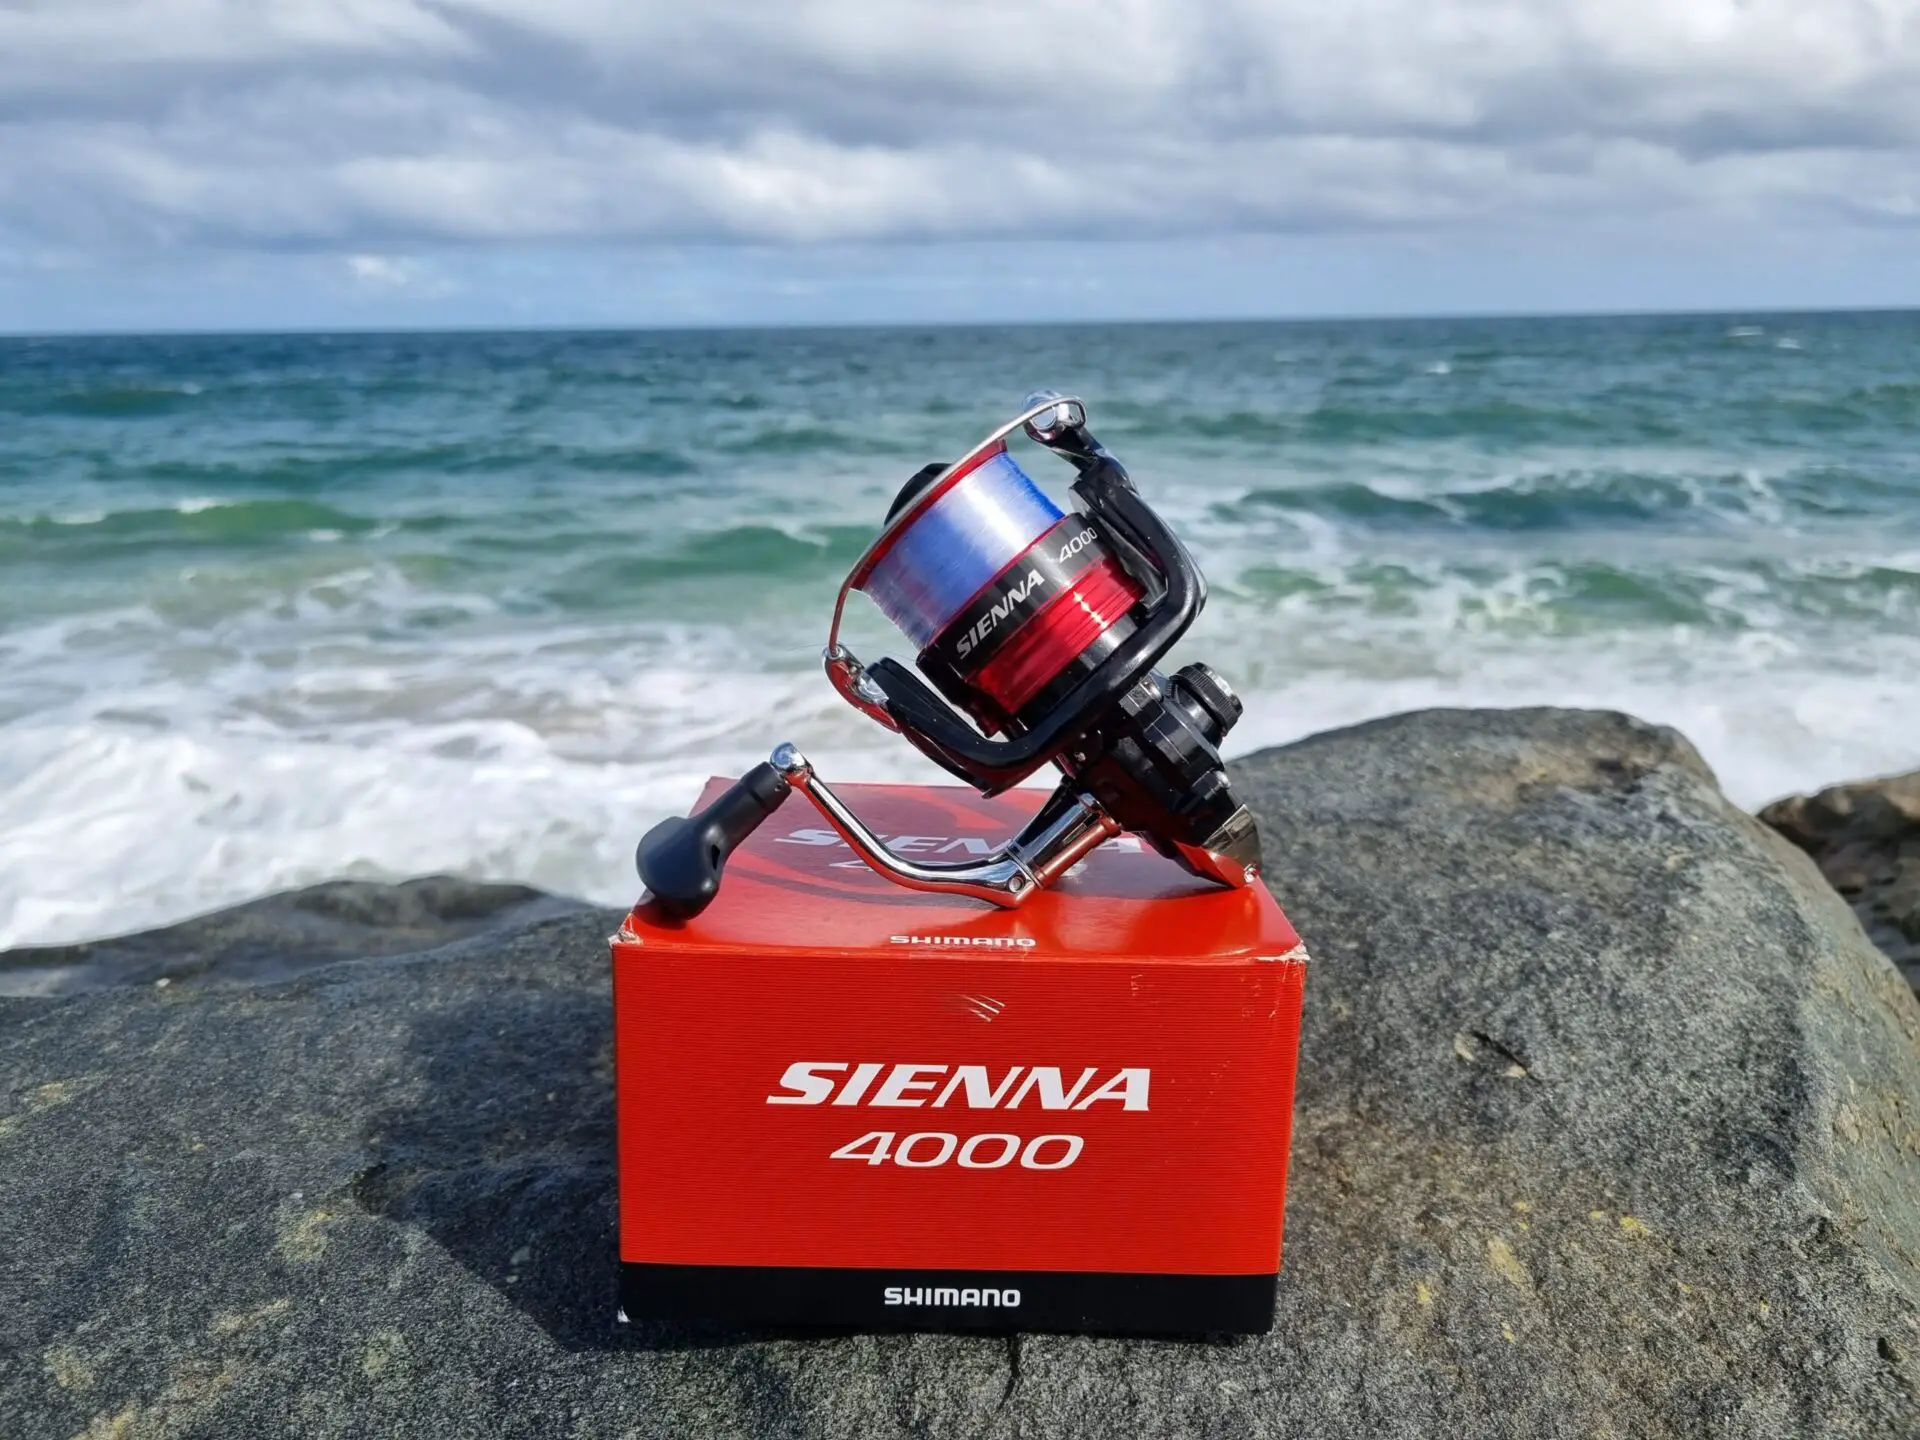 Shimano Sienna unboxed in front of the ocean